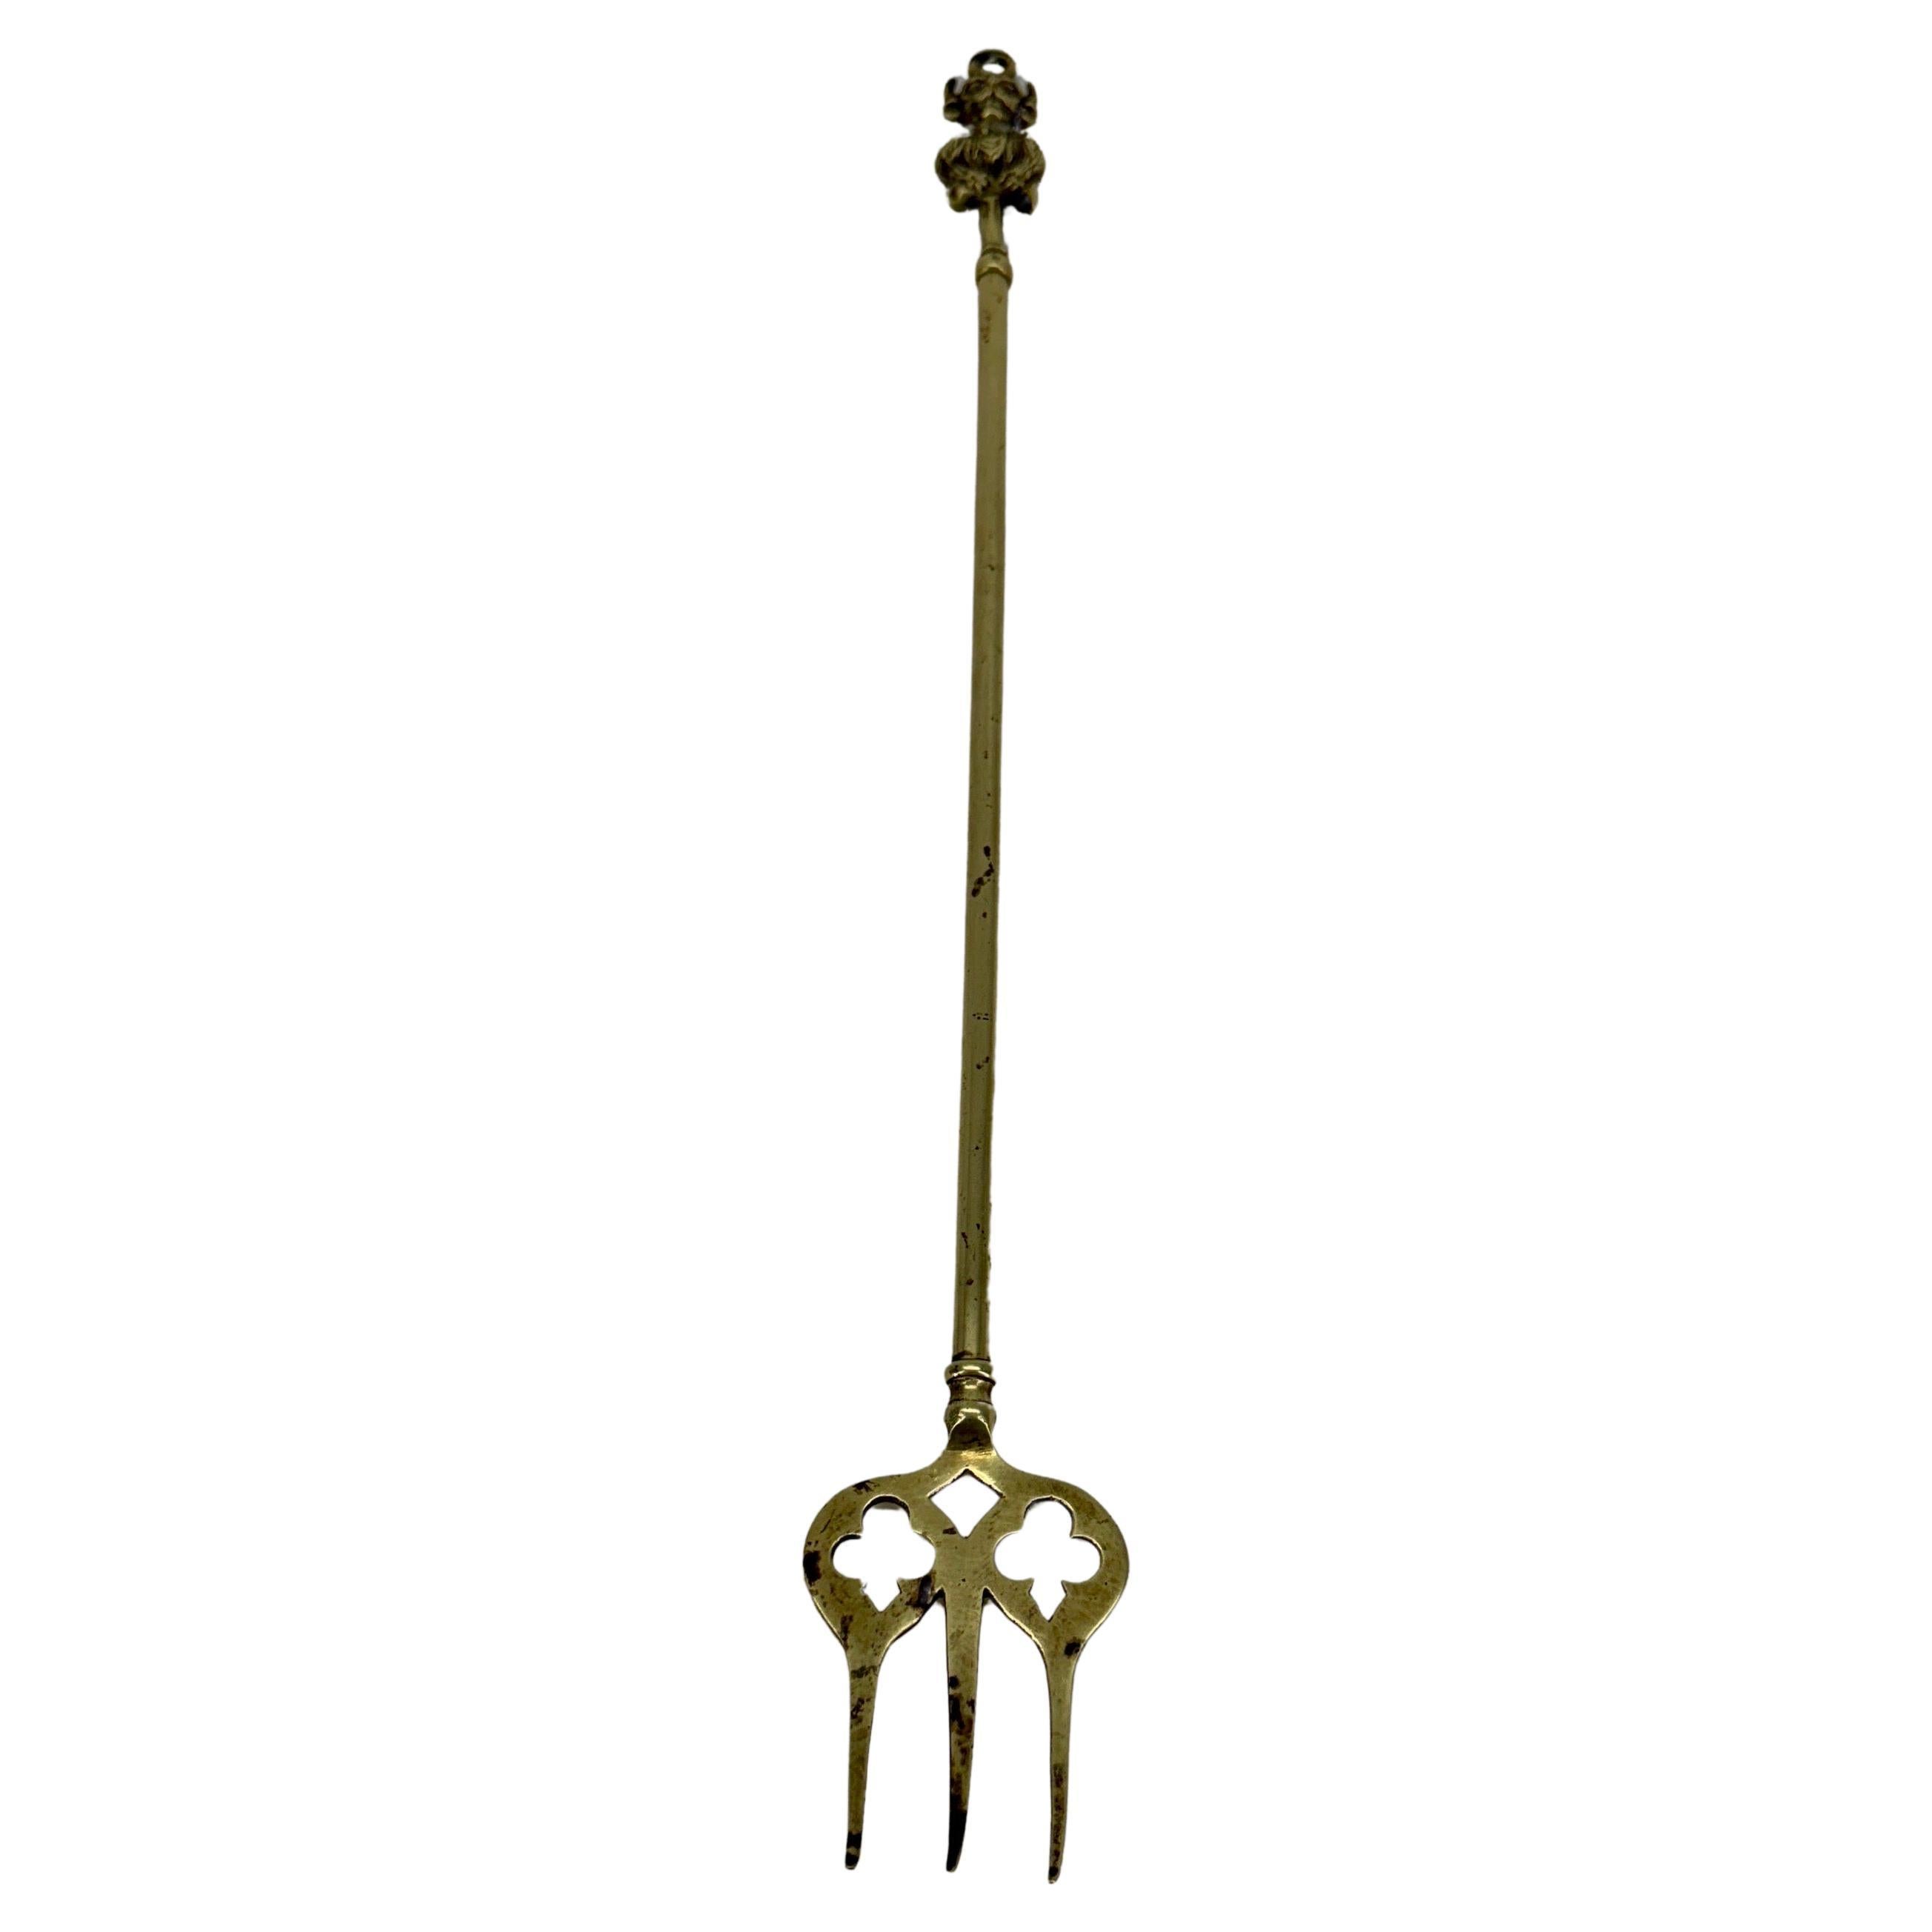 Danish Antique Brass Fireplace Neptune Toasting-fork For Sale